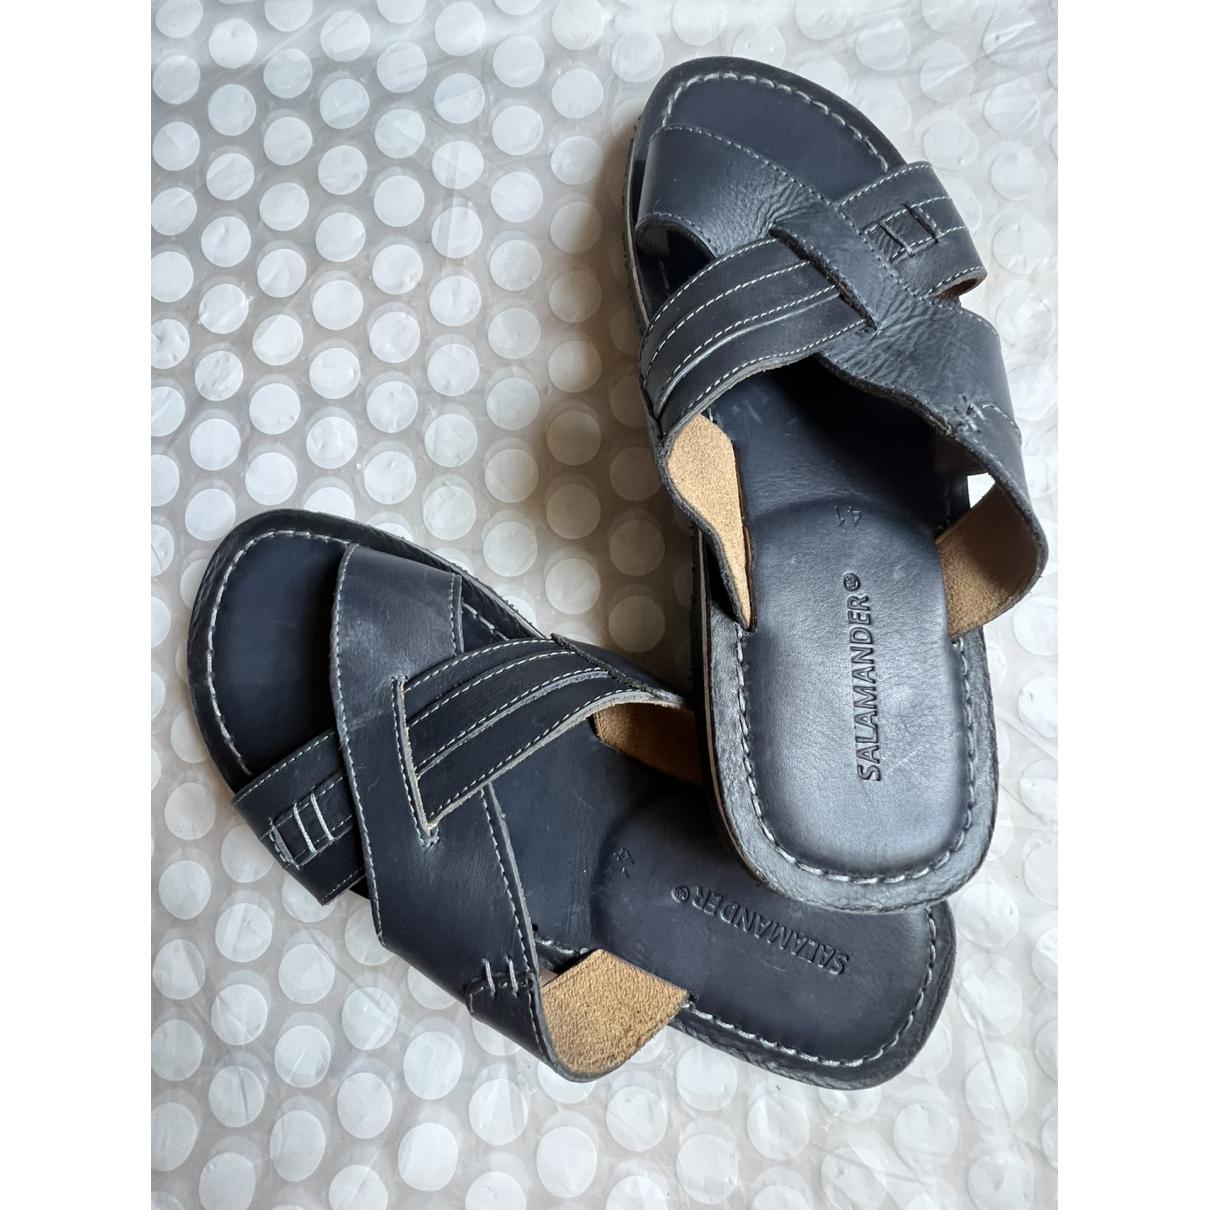 Leather sandals SALAMANDER Navy size 41 EU in Leather - 22557086